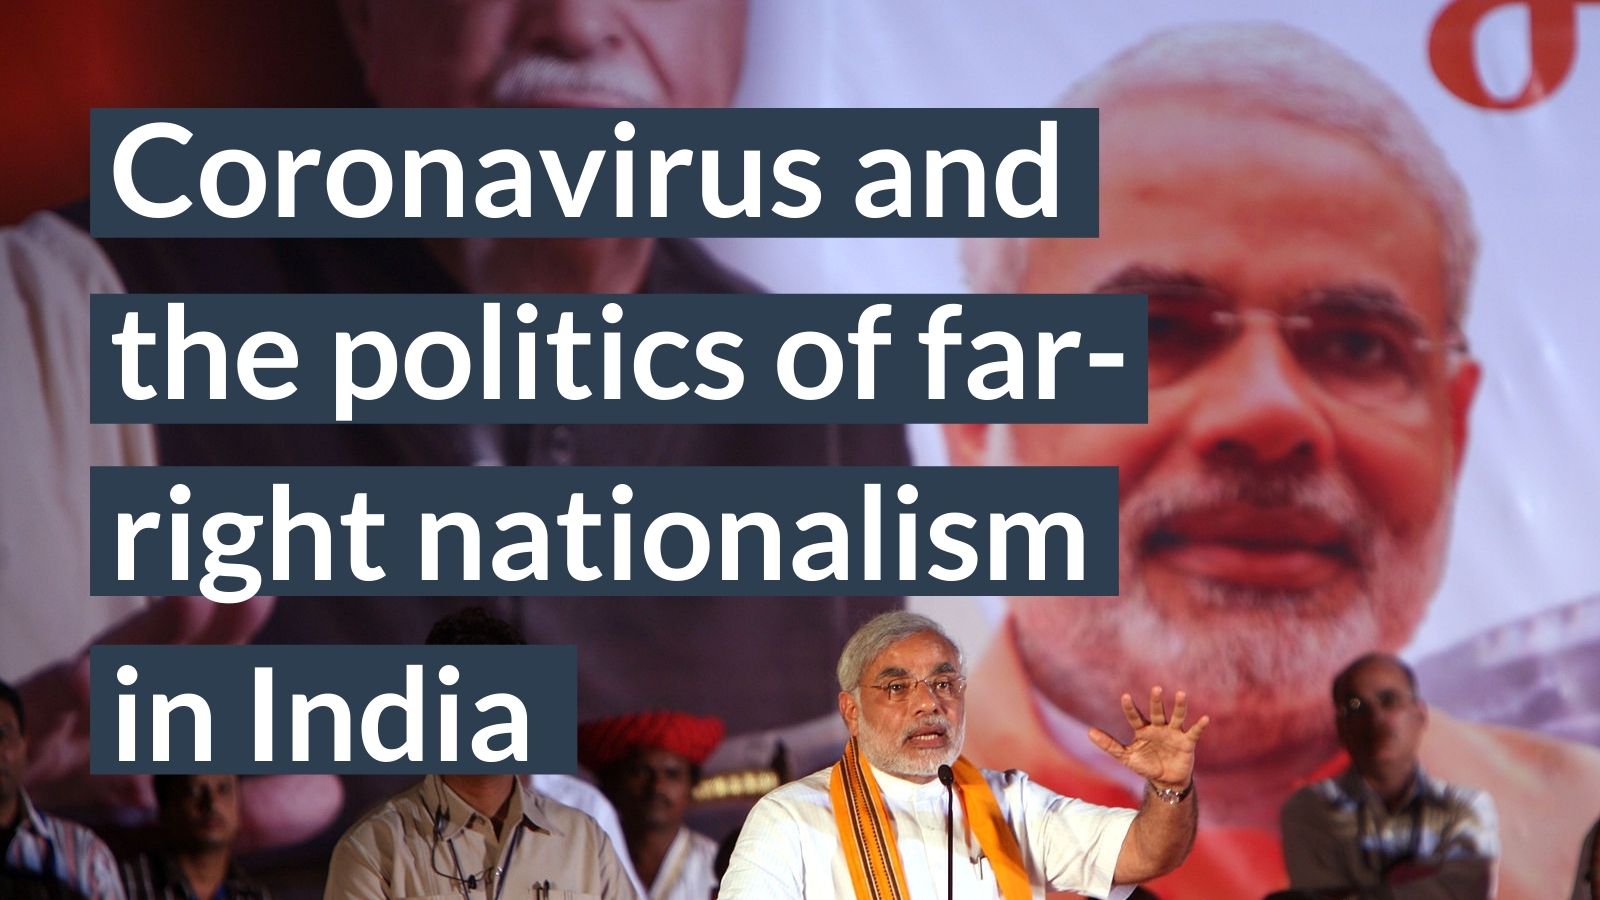 Coronavirus and the politics of far-right nationalism in India